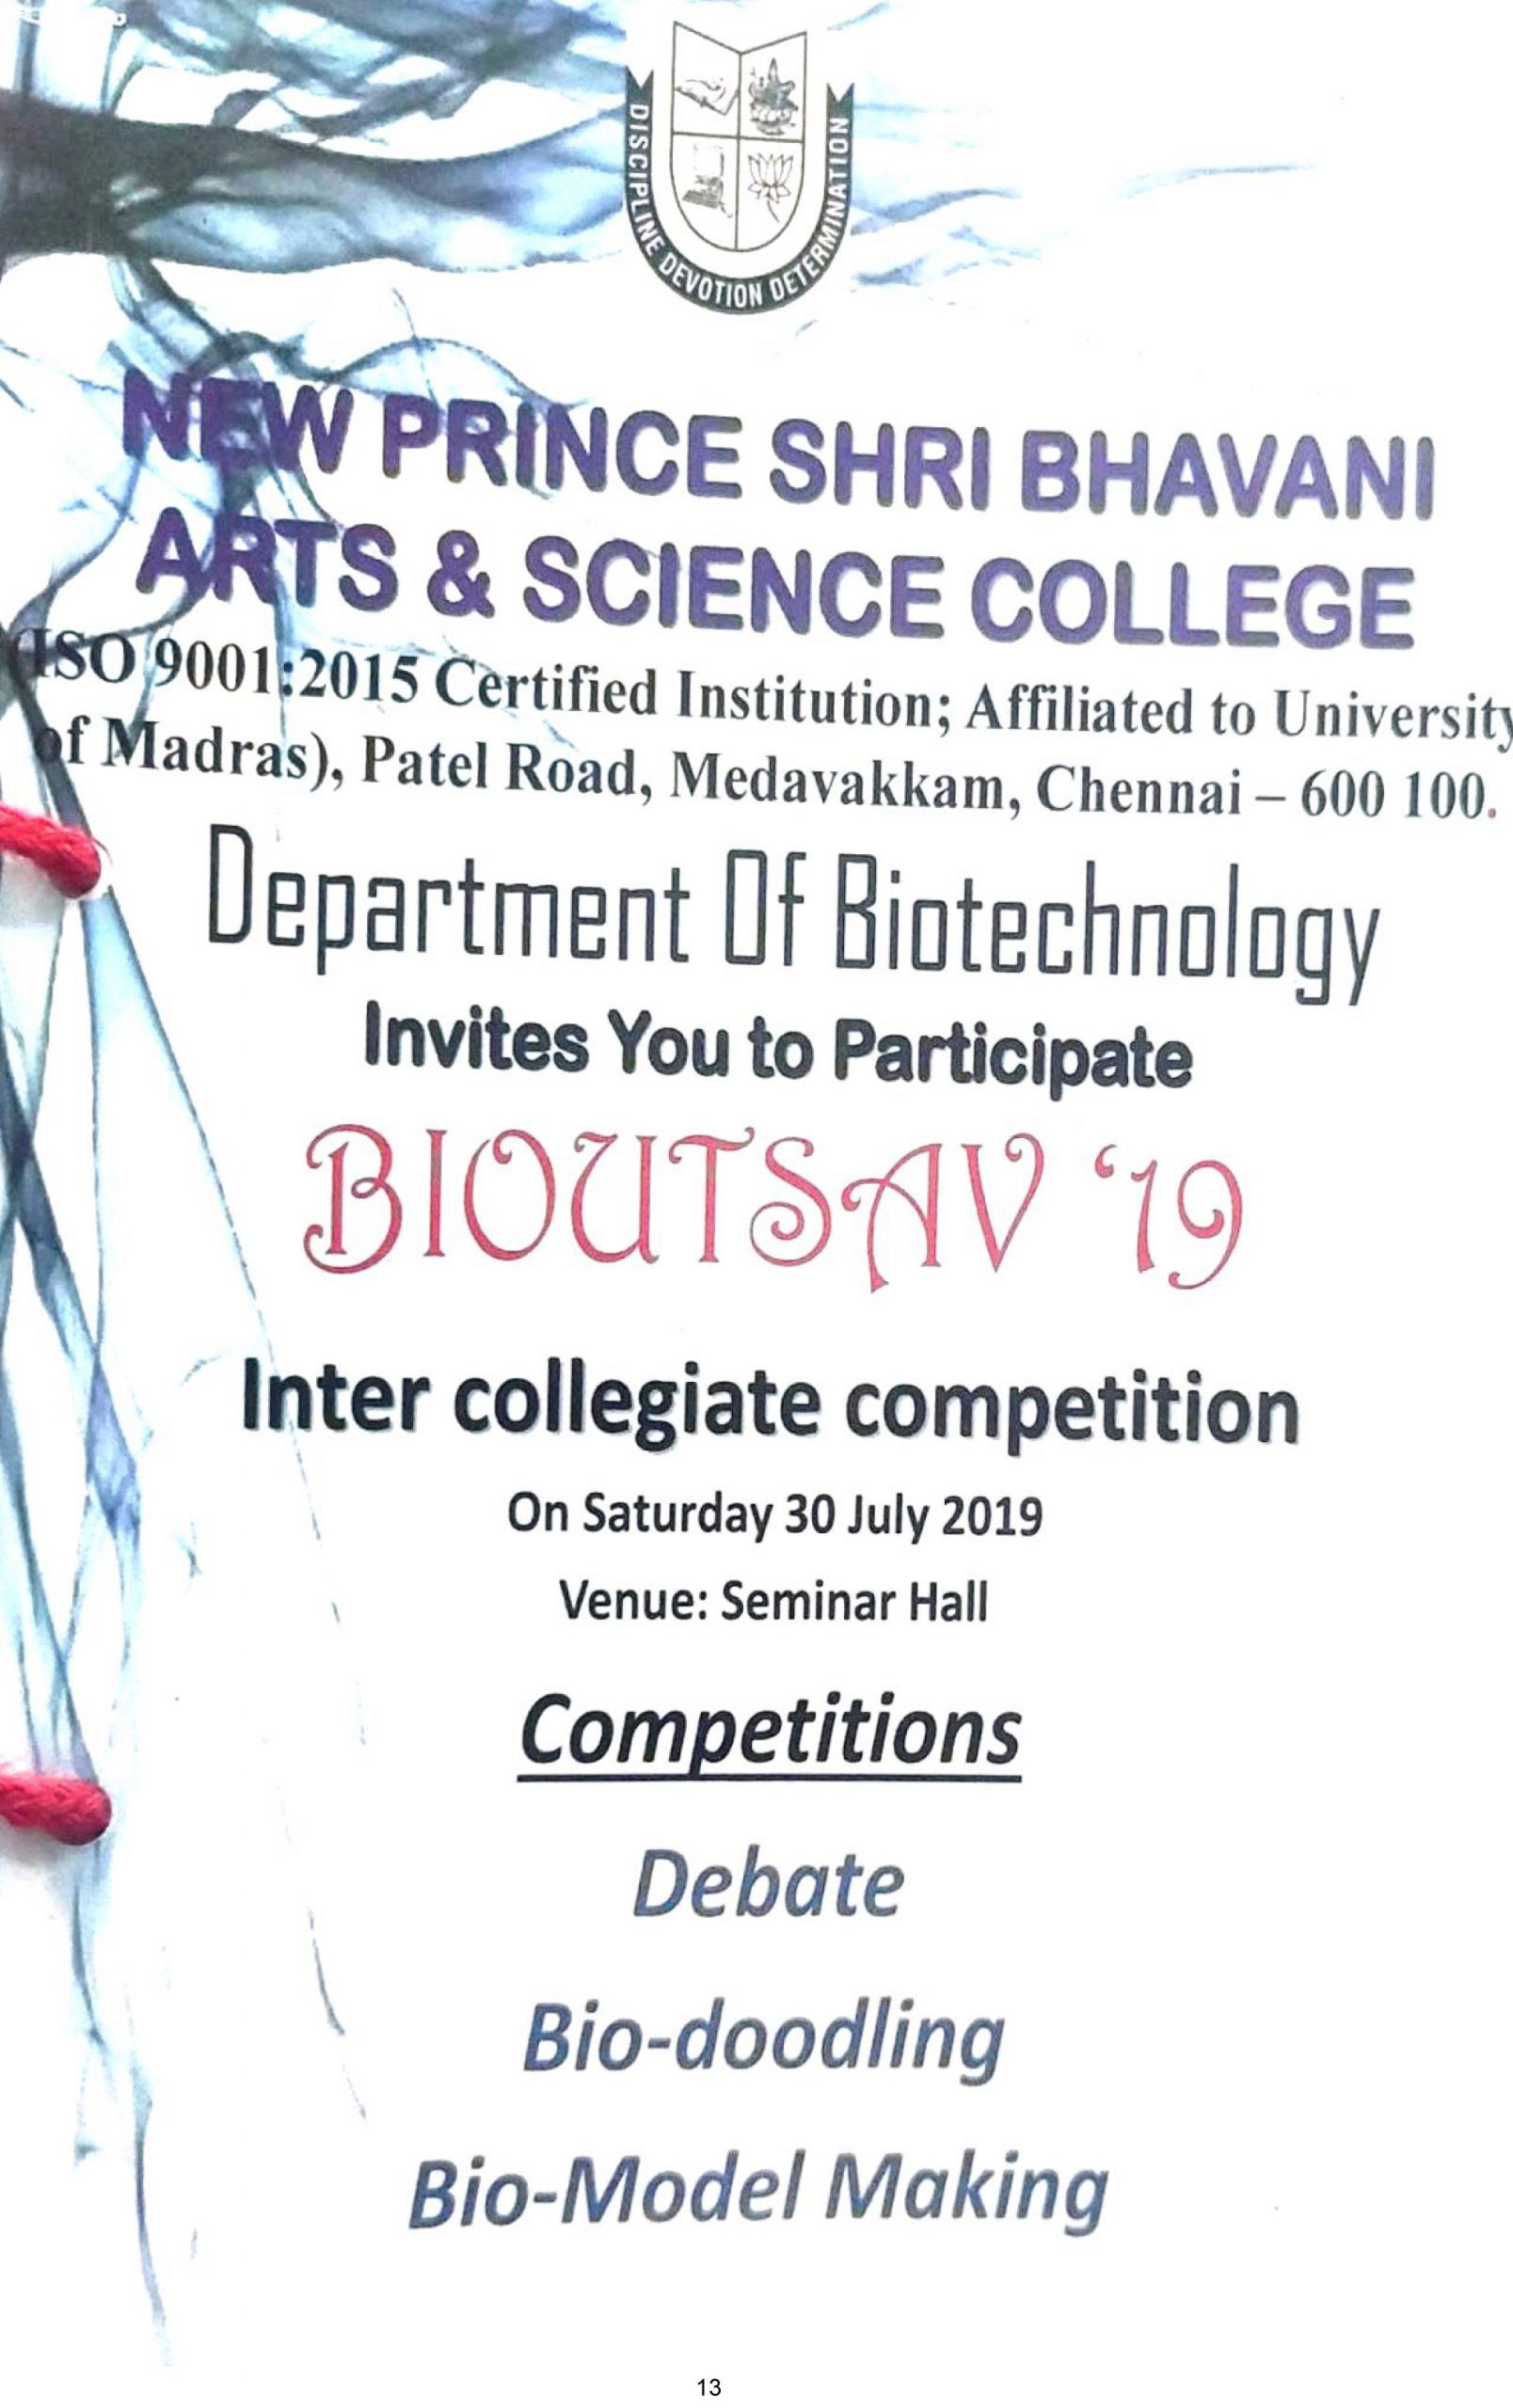 Dept. of Biotechnology-Guest Lecture-Inter Collegiate Competition-30-07-19